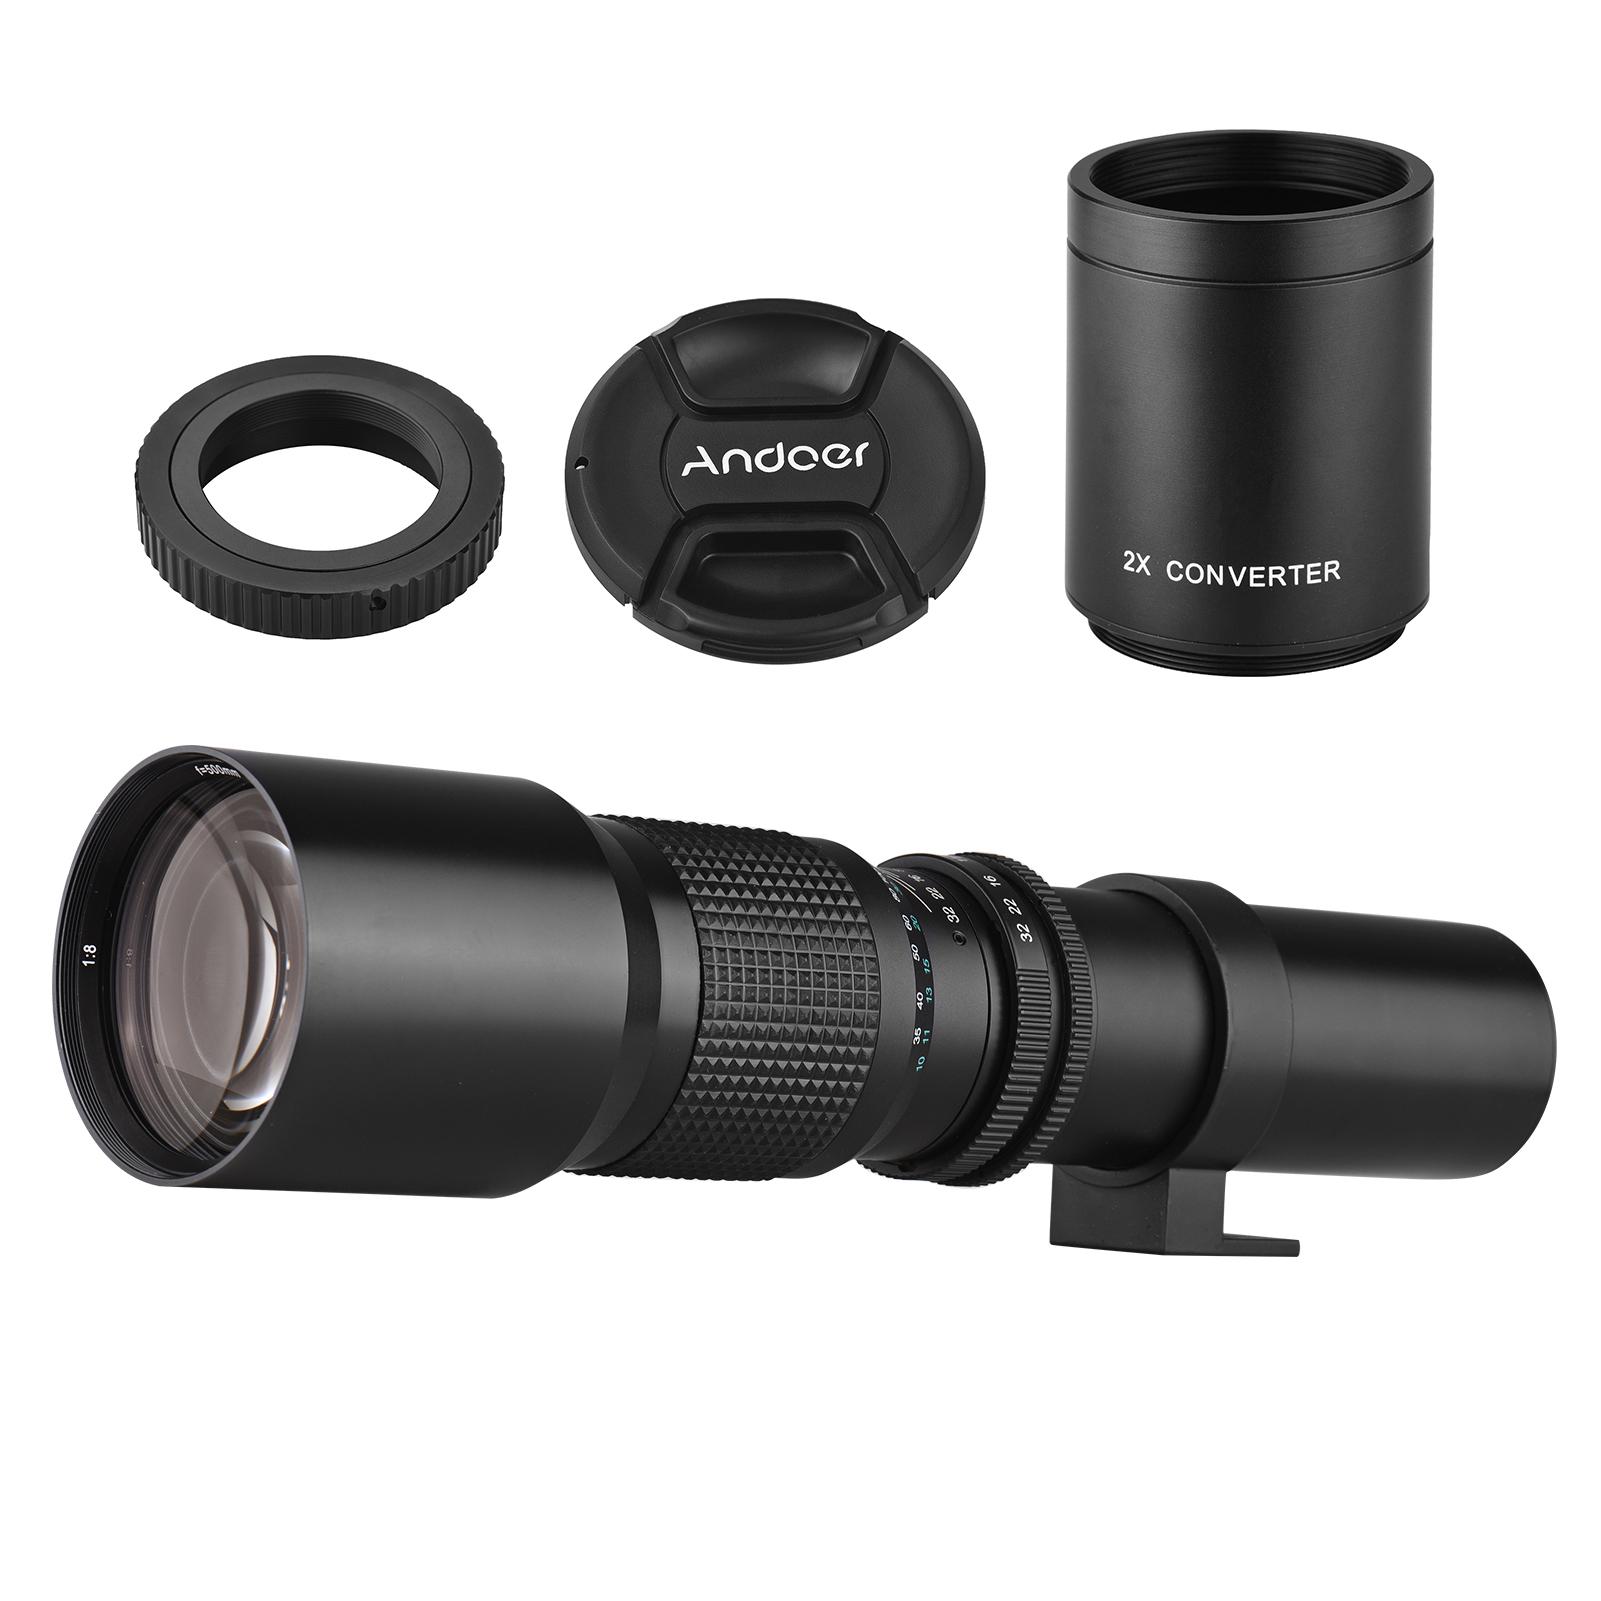 Andoer 500mm/ 1000mm f/8 Manual Focus Camera High Power Telephoto Lens with 2X Converter Lens Cover